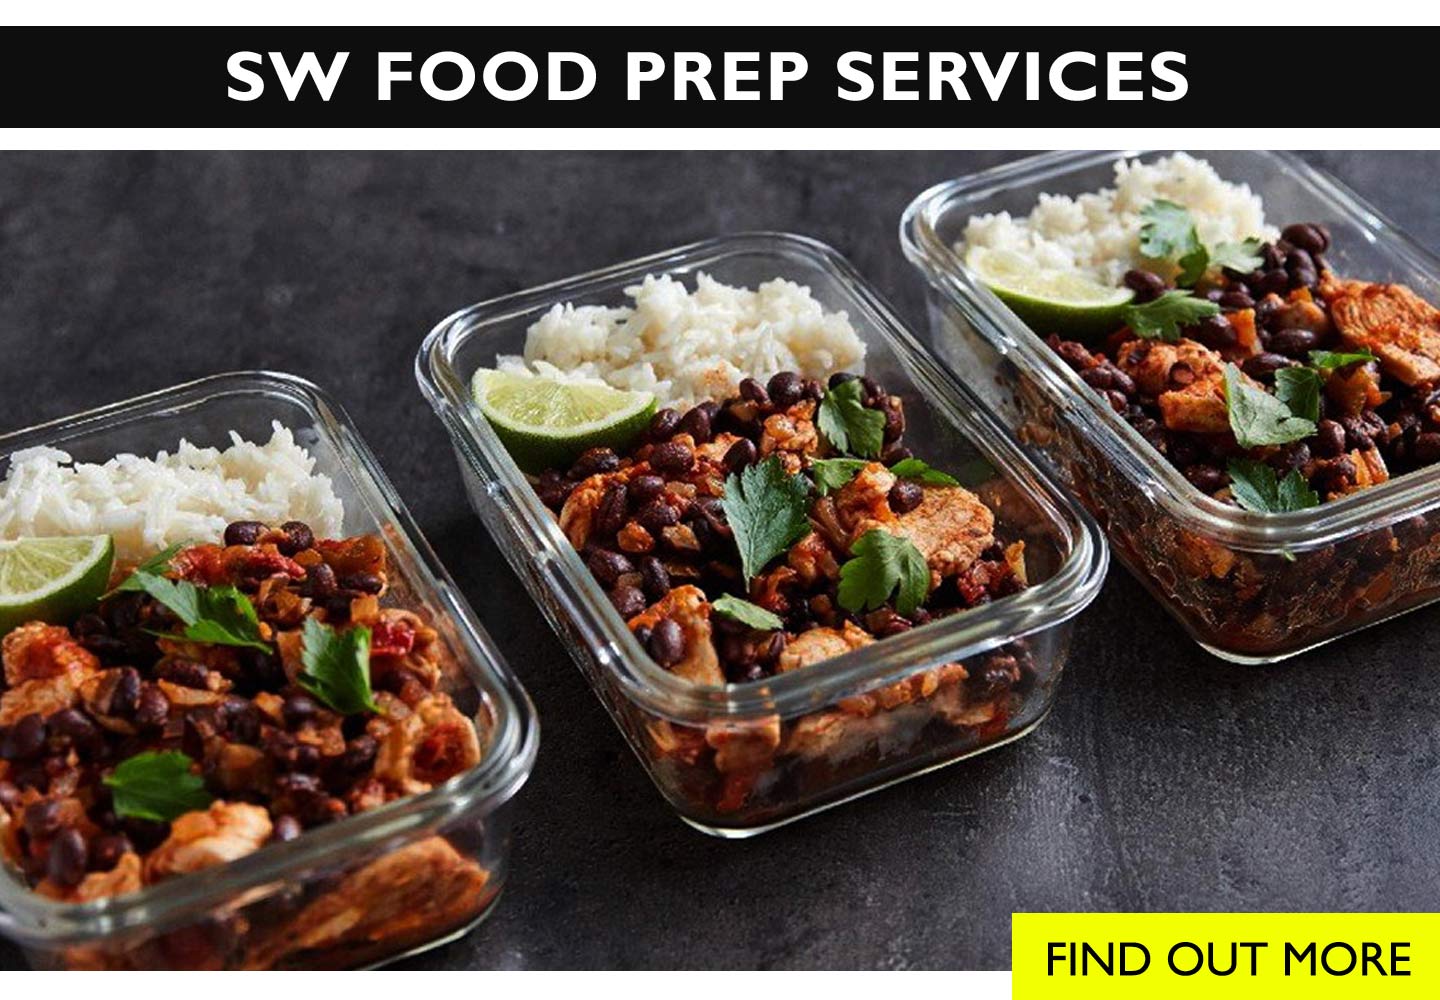 Food preperation services available via SW Fitness - find out more.